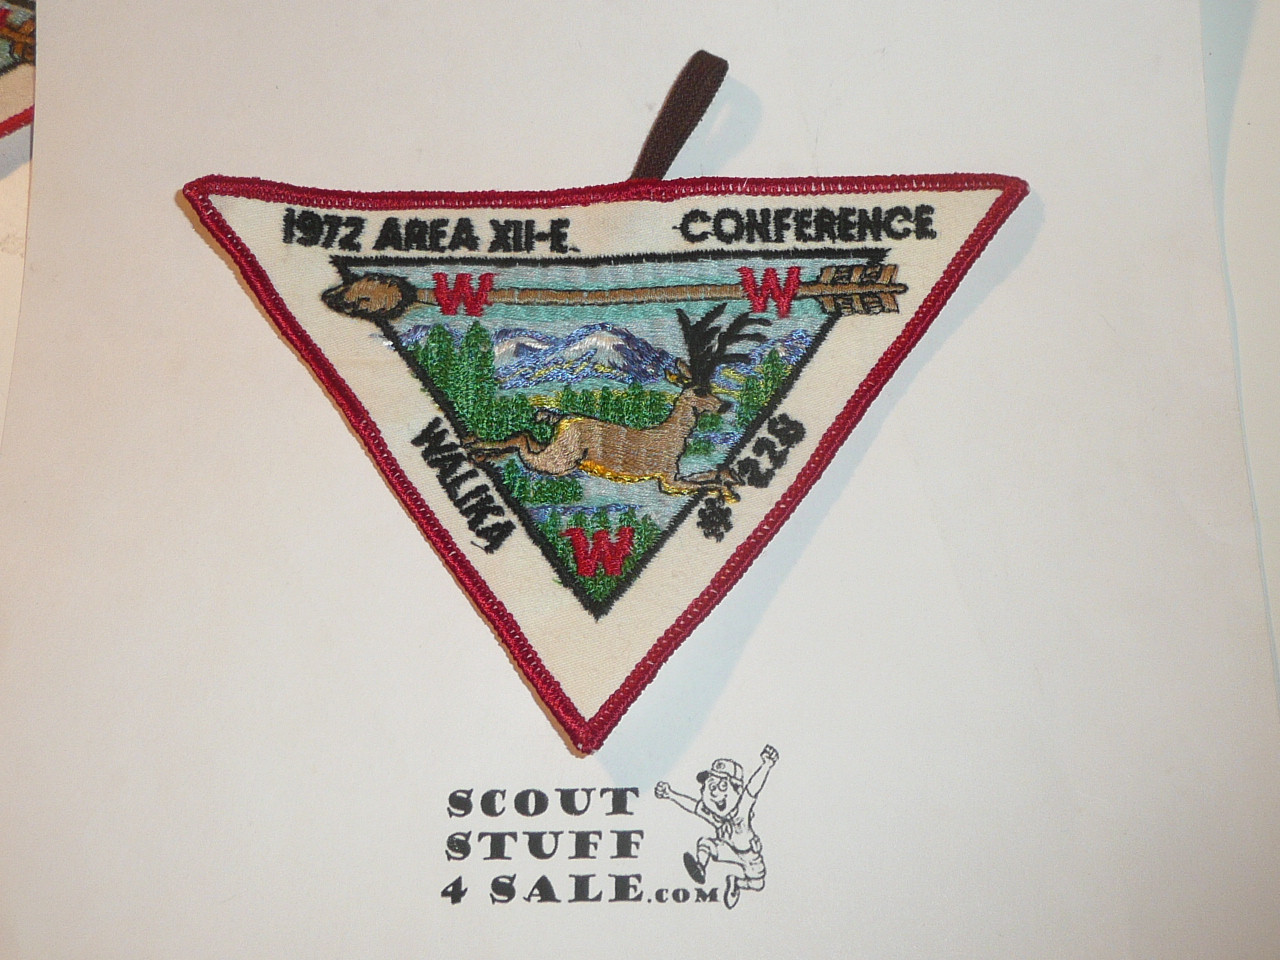 1972 Order of the Arrow 12-E Conference Patch, twill variety